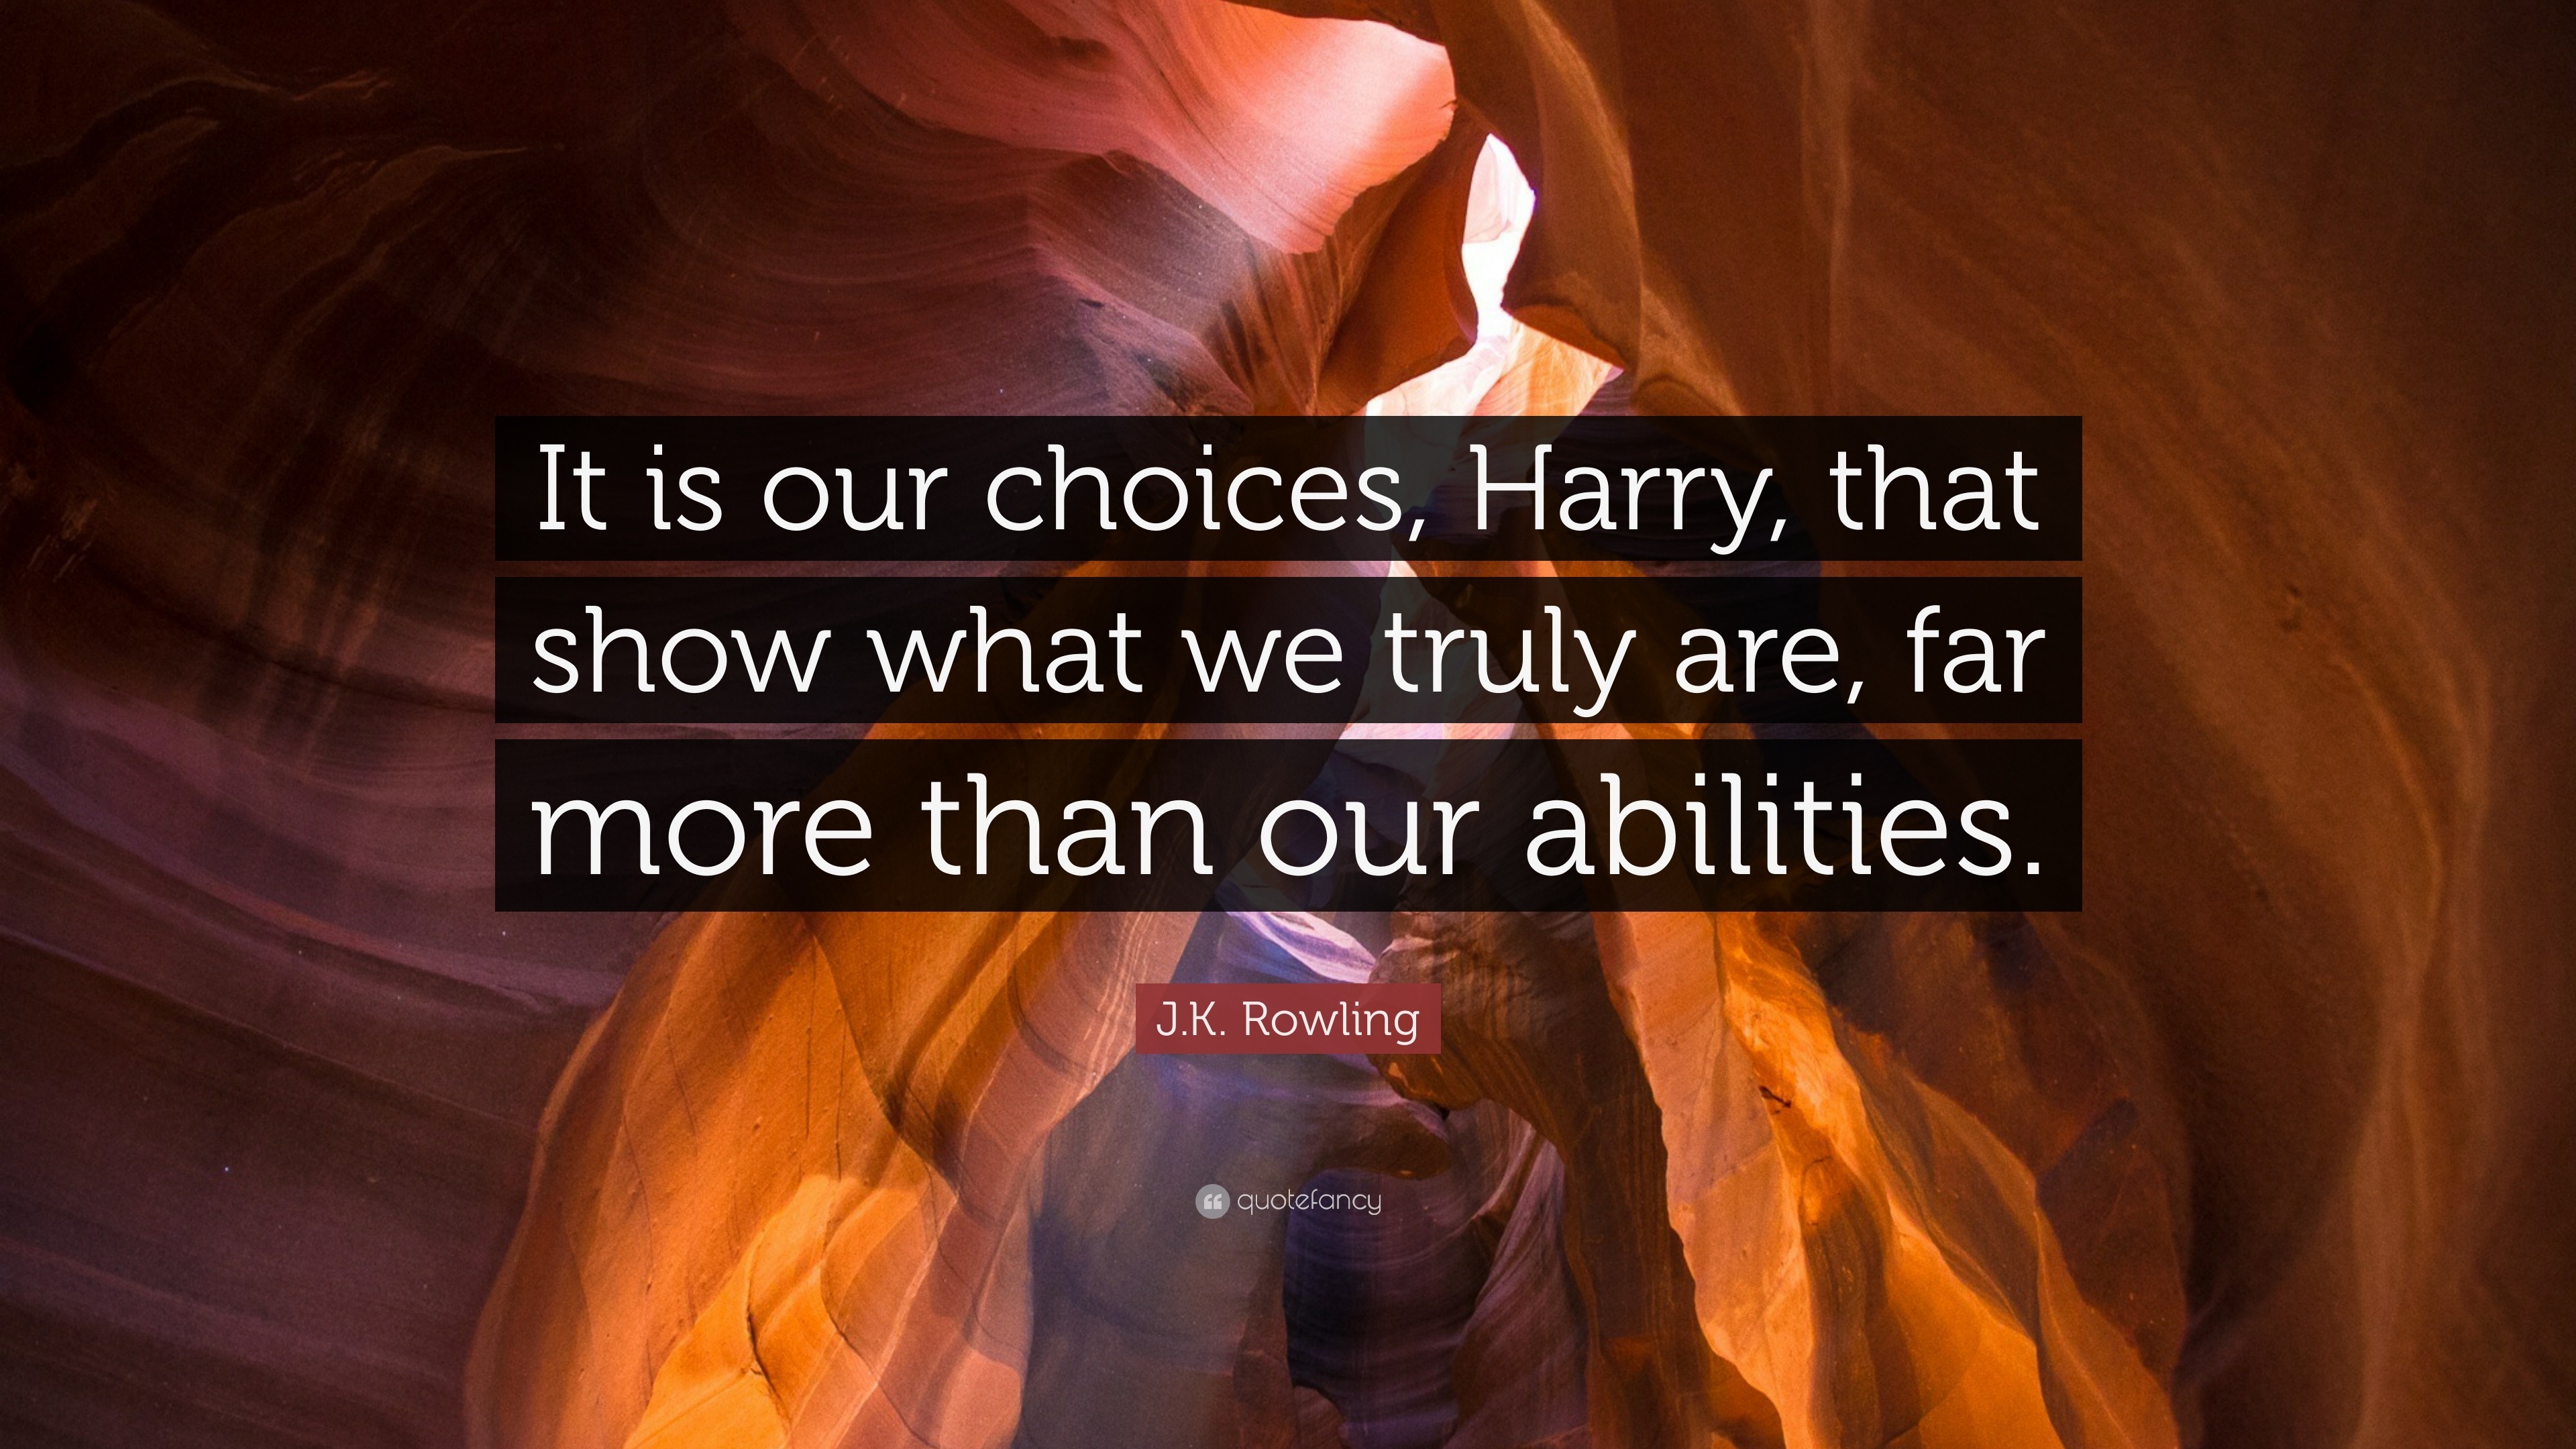 J.K. Rowling Quote: “It is our choices, Harry, that show what we truly